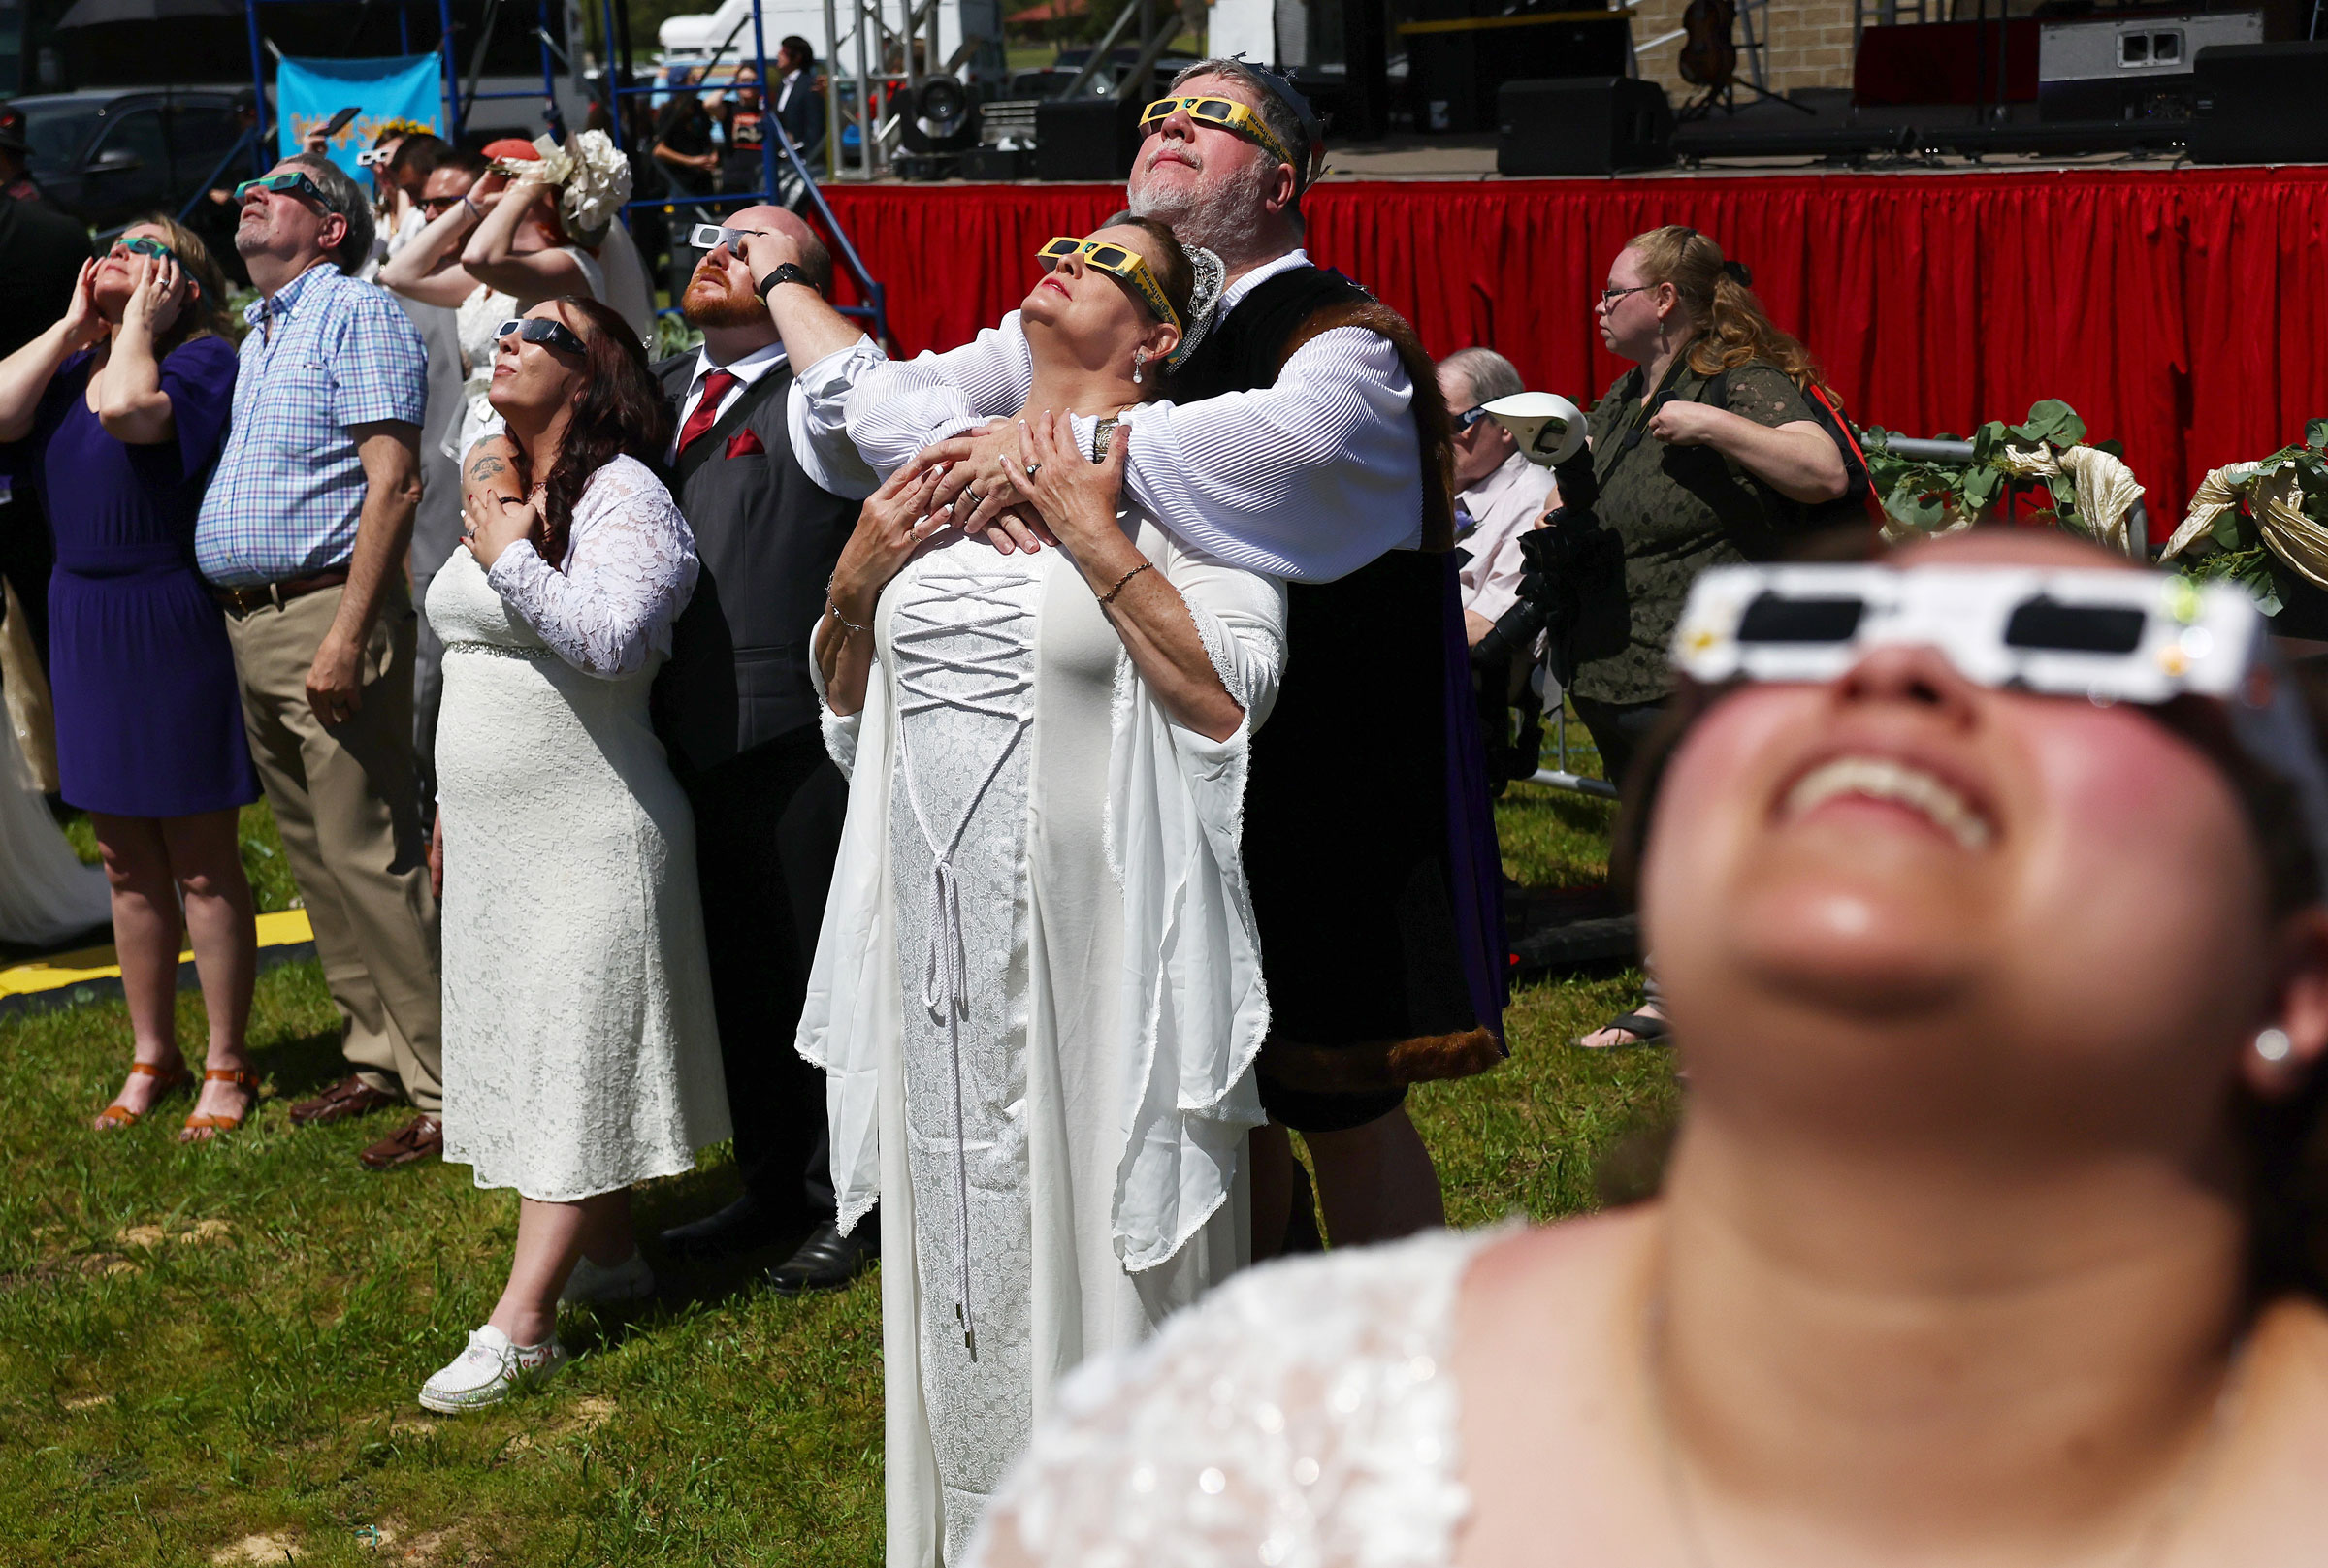 Couples view the solar eclipse during a mass wedding at the Total Eclipse of the Heart festival in Russellville, Ark.